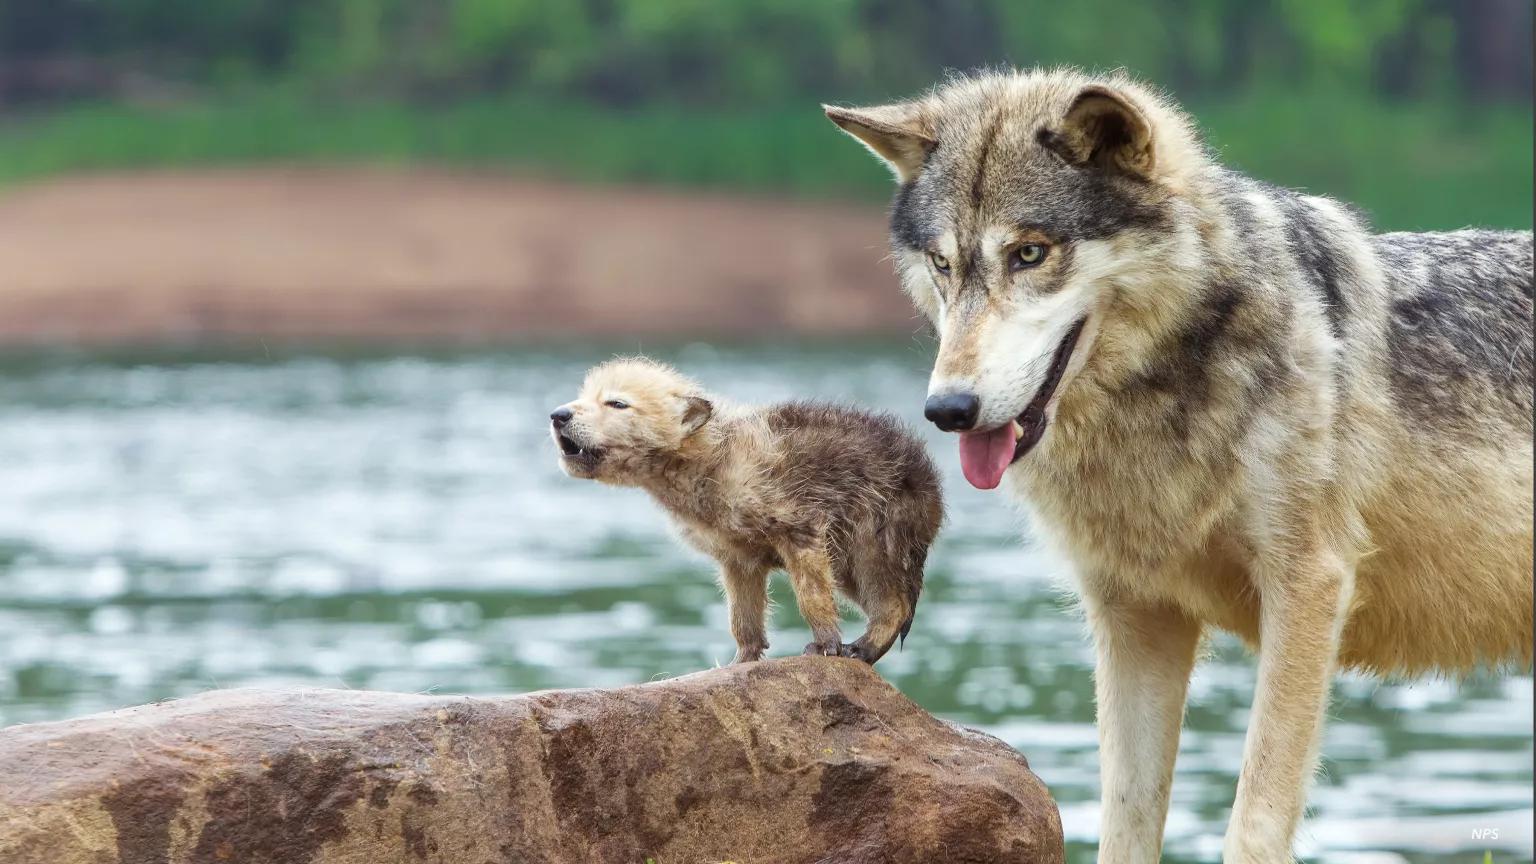 A gray wolf and her pup standing side by side with a body of water in the background in central Minnesota